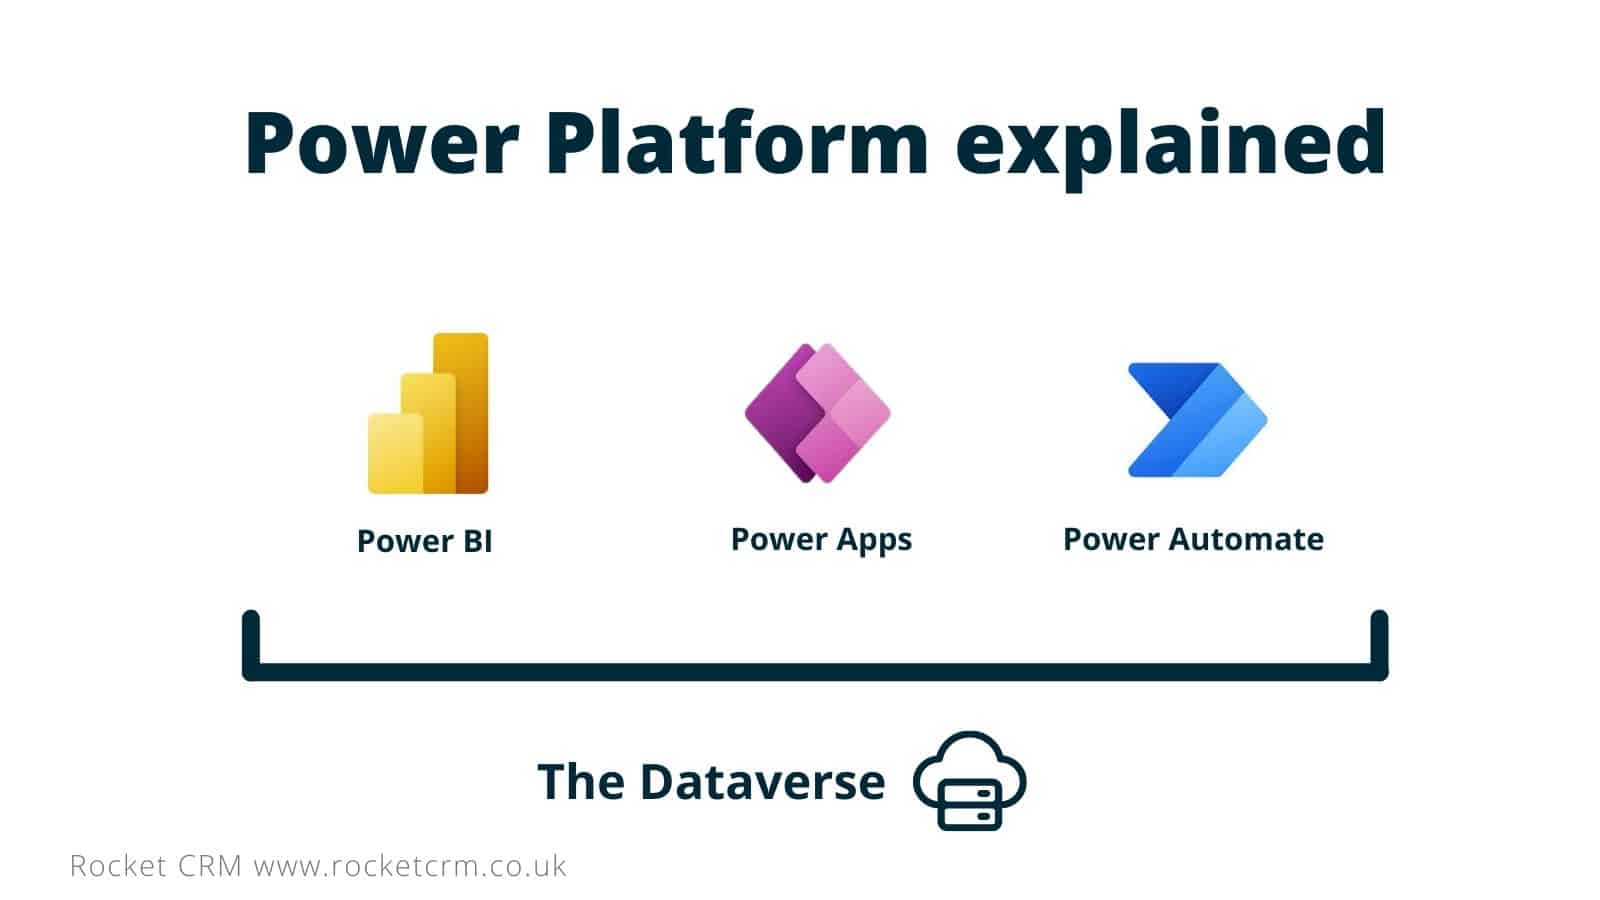 Power Platform explained, Power BI, Power Apps and Power Automate logos